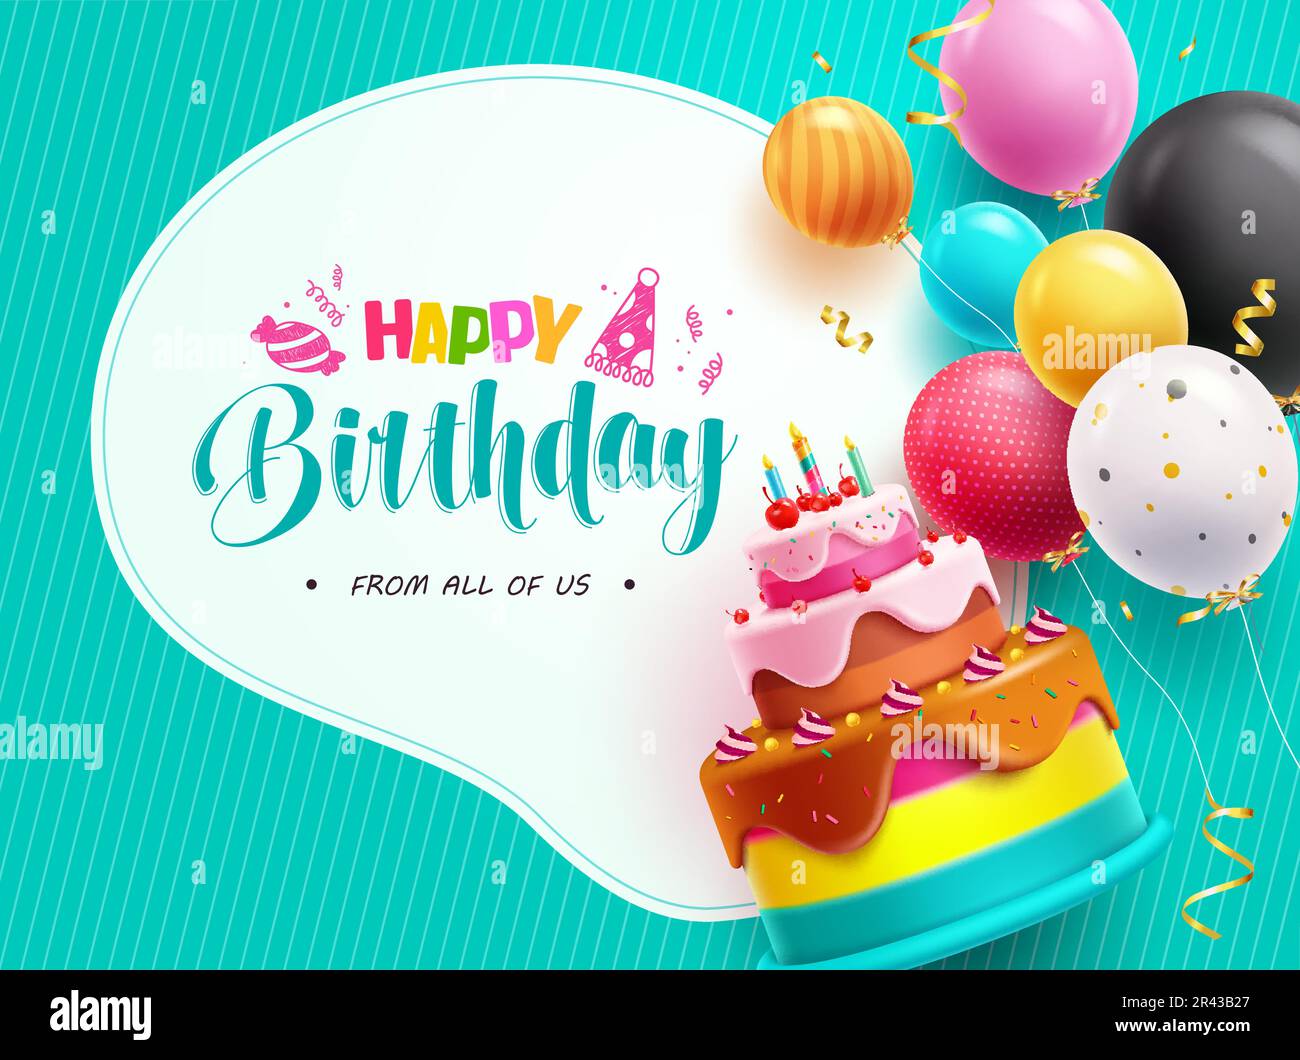 Happy birthday text vector template. Happy birthday greeting with cake and balloon elements. Vector illustration invitation card design. Stock Vector